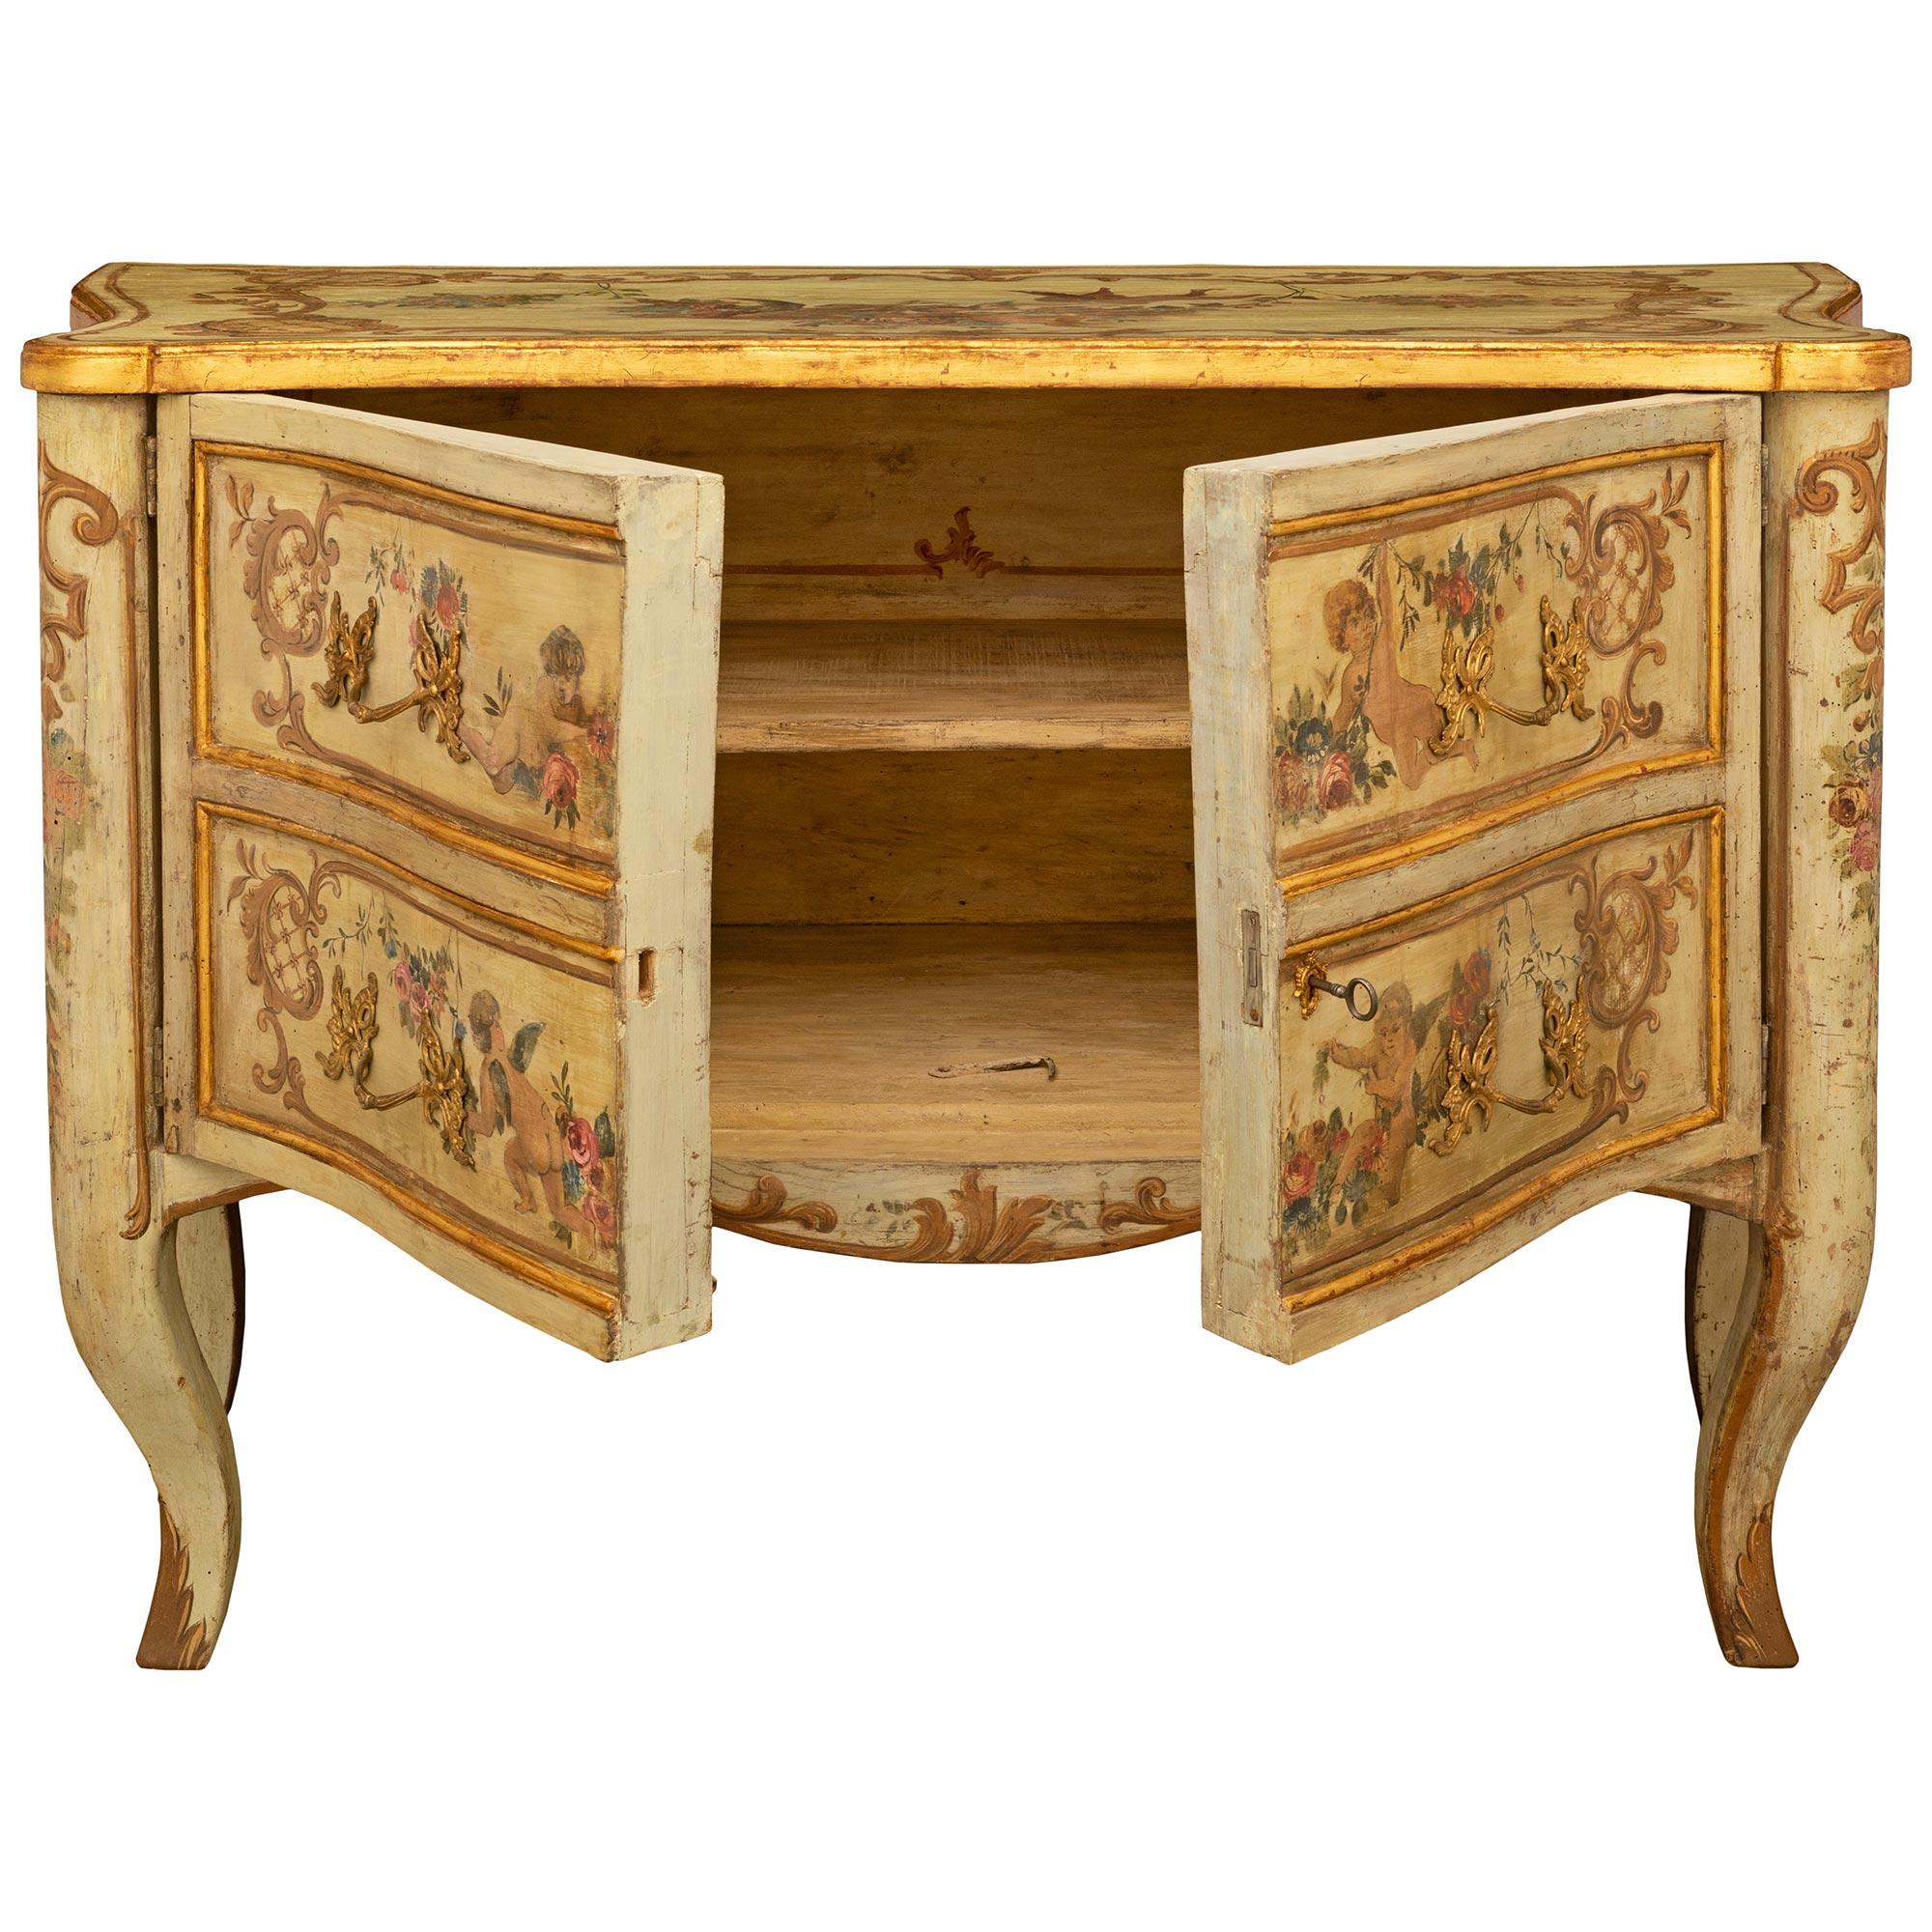 Italian 18th century Louis XV period Giltwood, Ormolu and patinated wood chest In Good Condition For Sale In West Palm Beach, FL